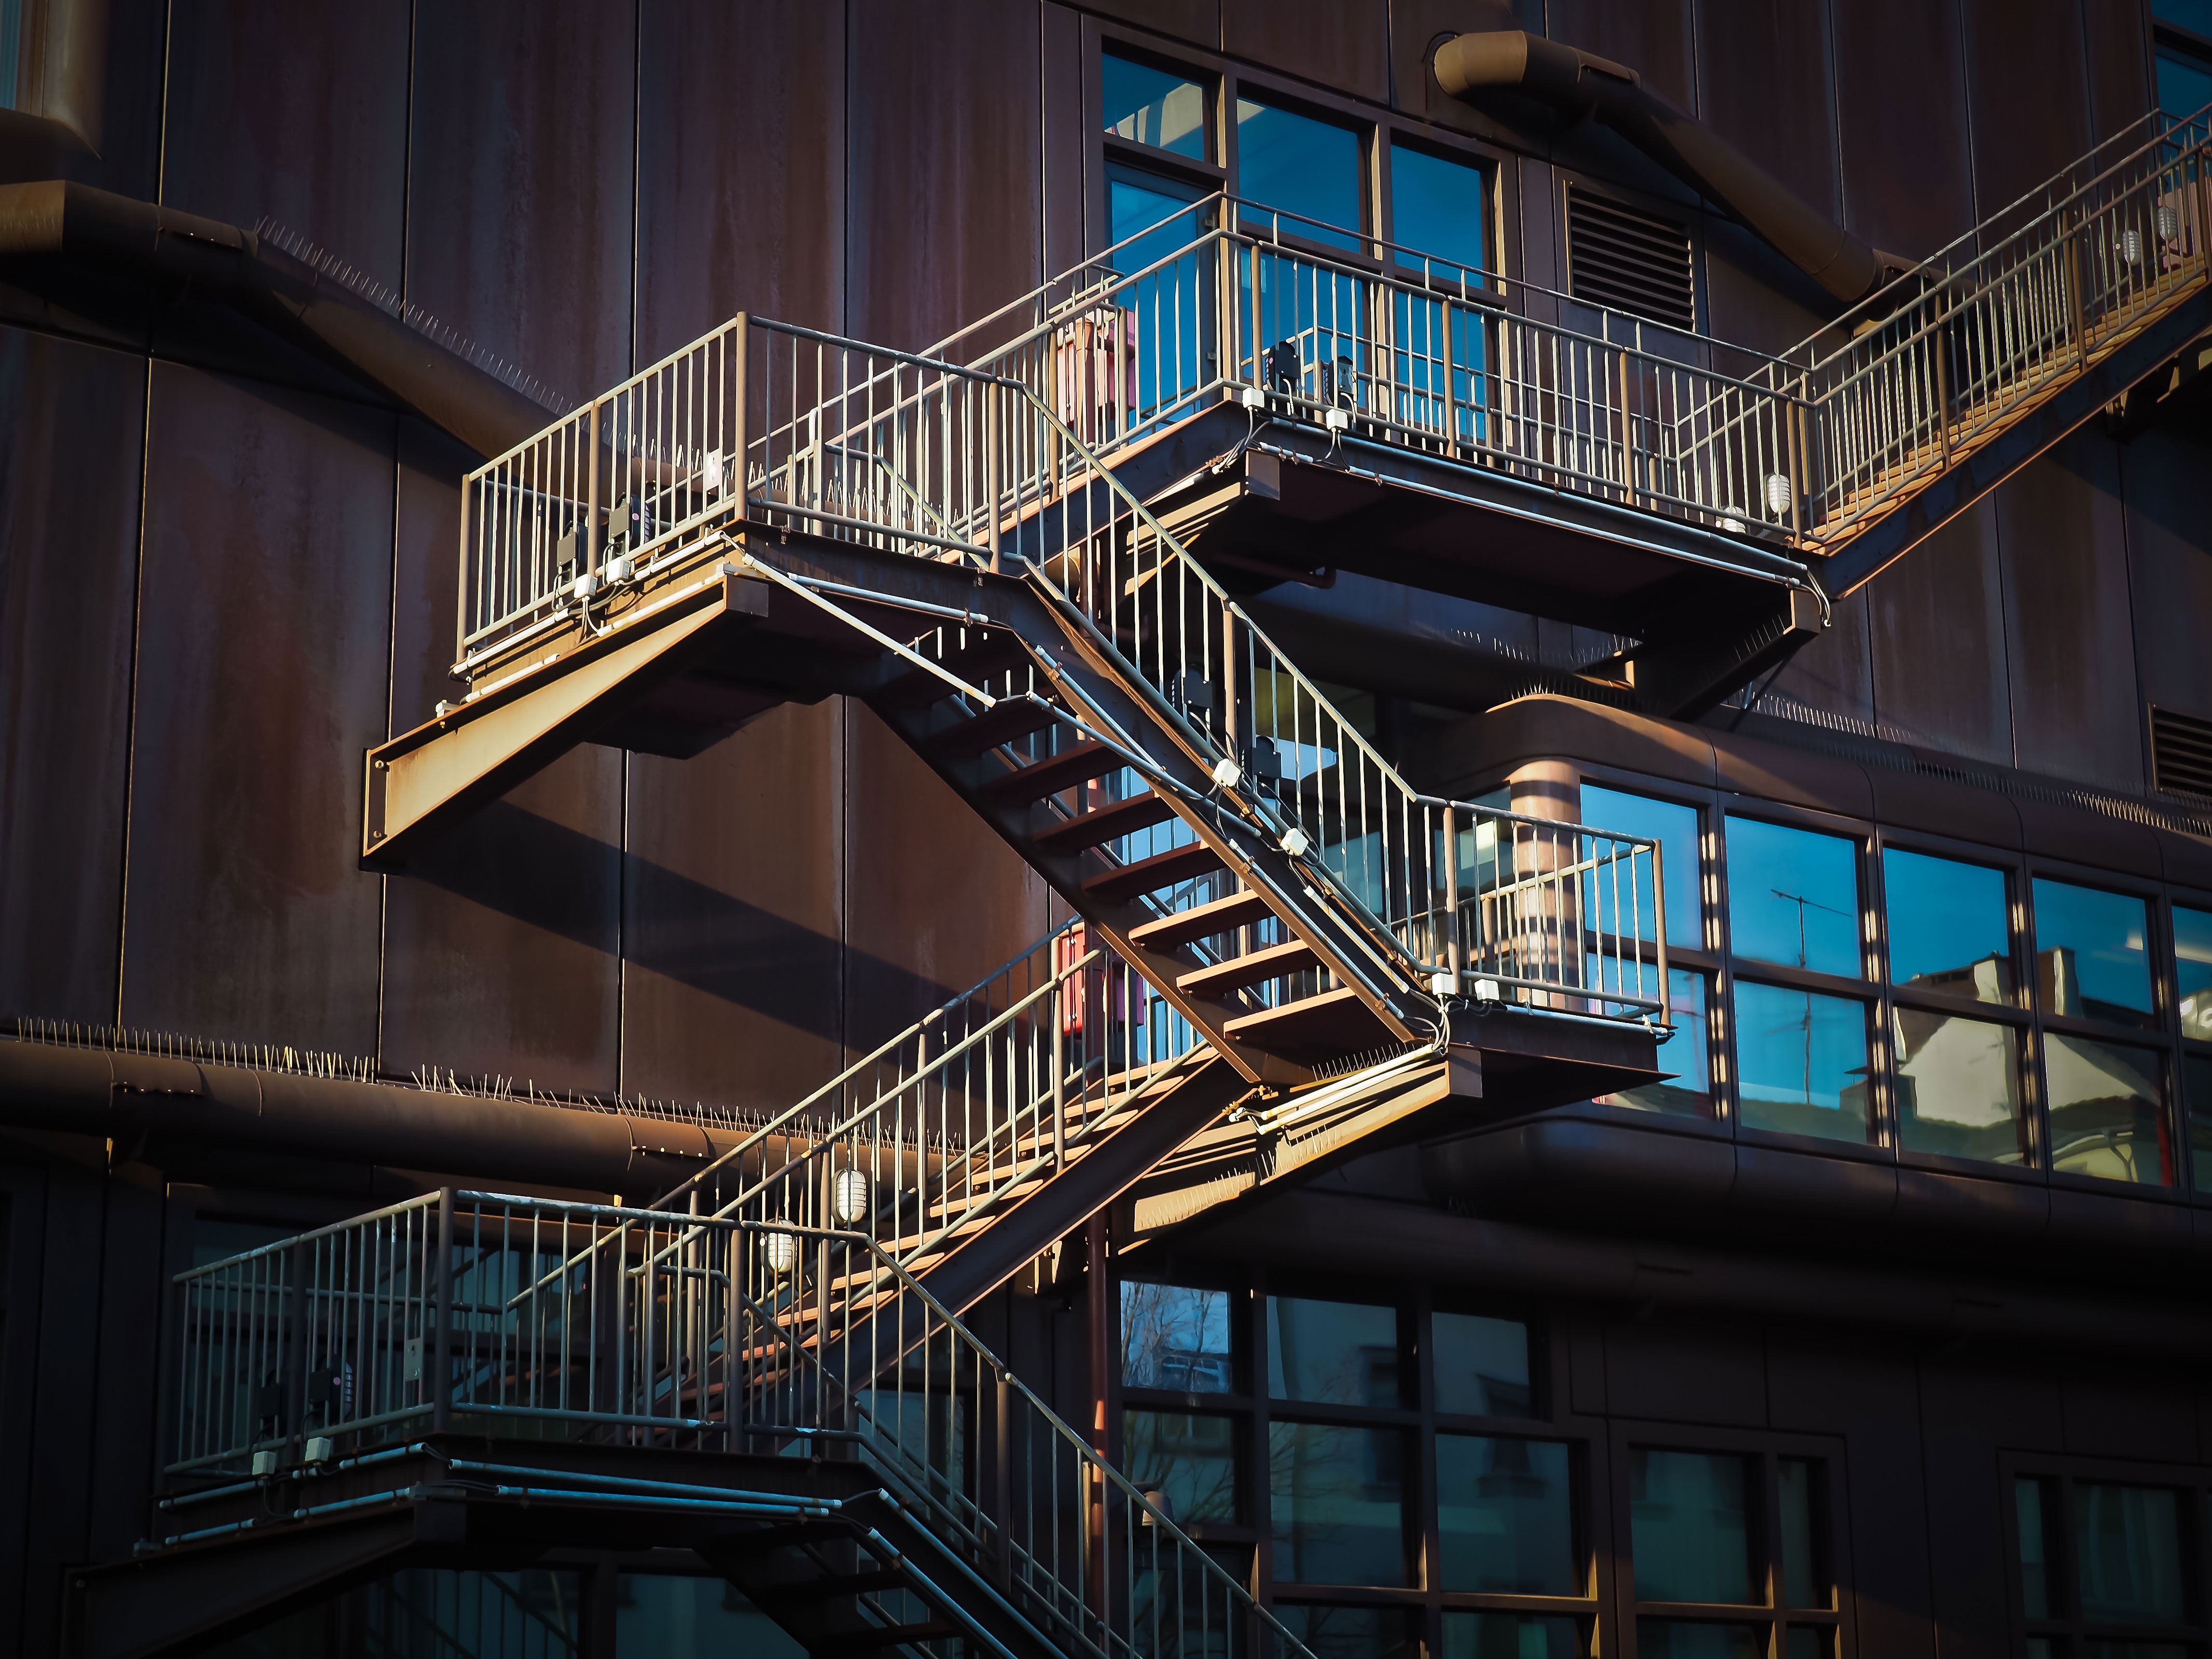 Free Images : architecture, night, building, city, staircase, metal ...